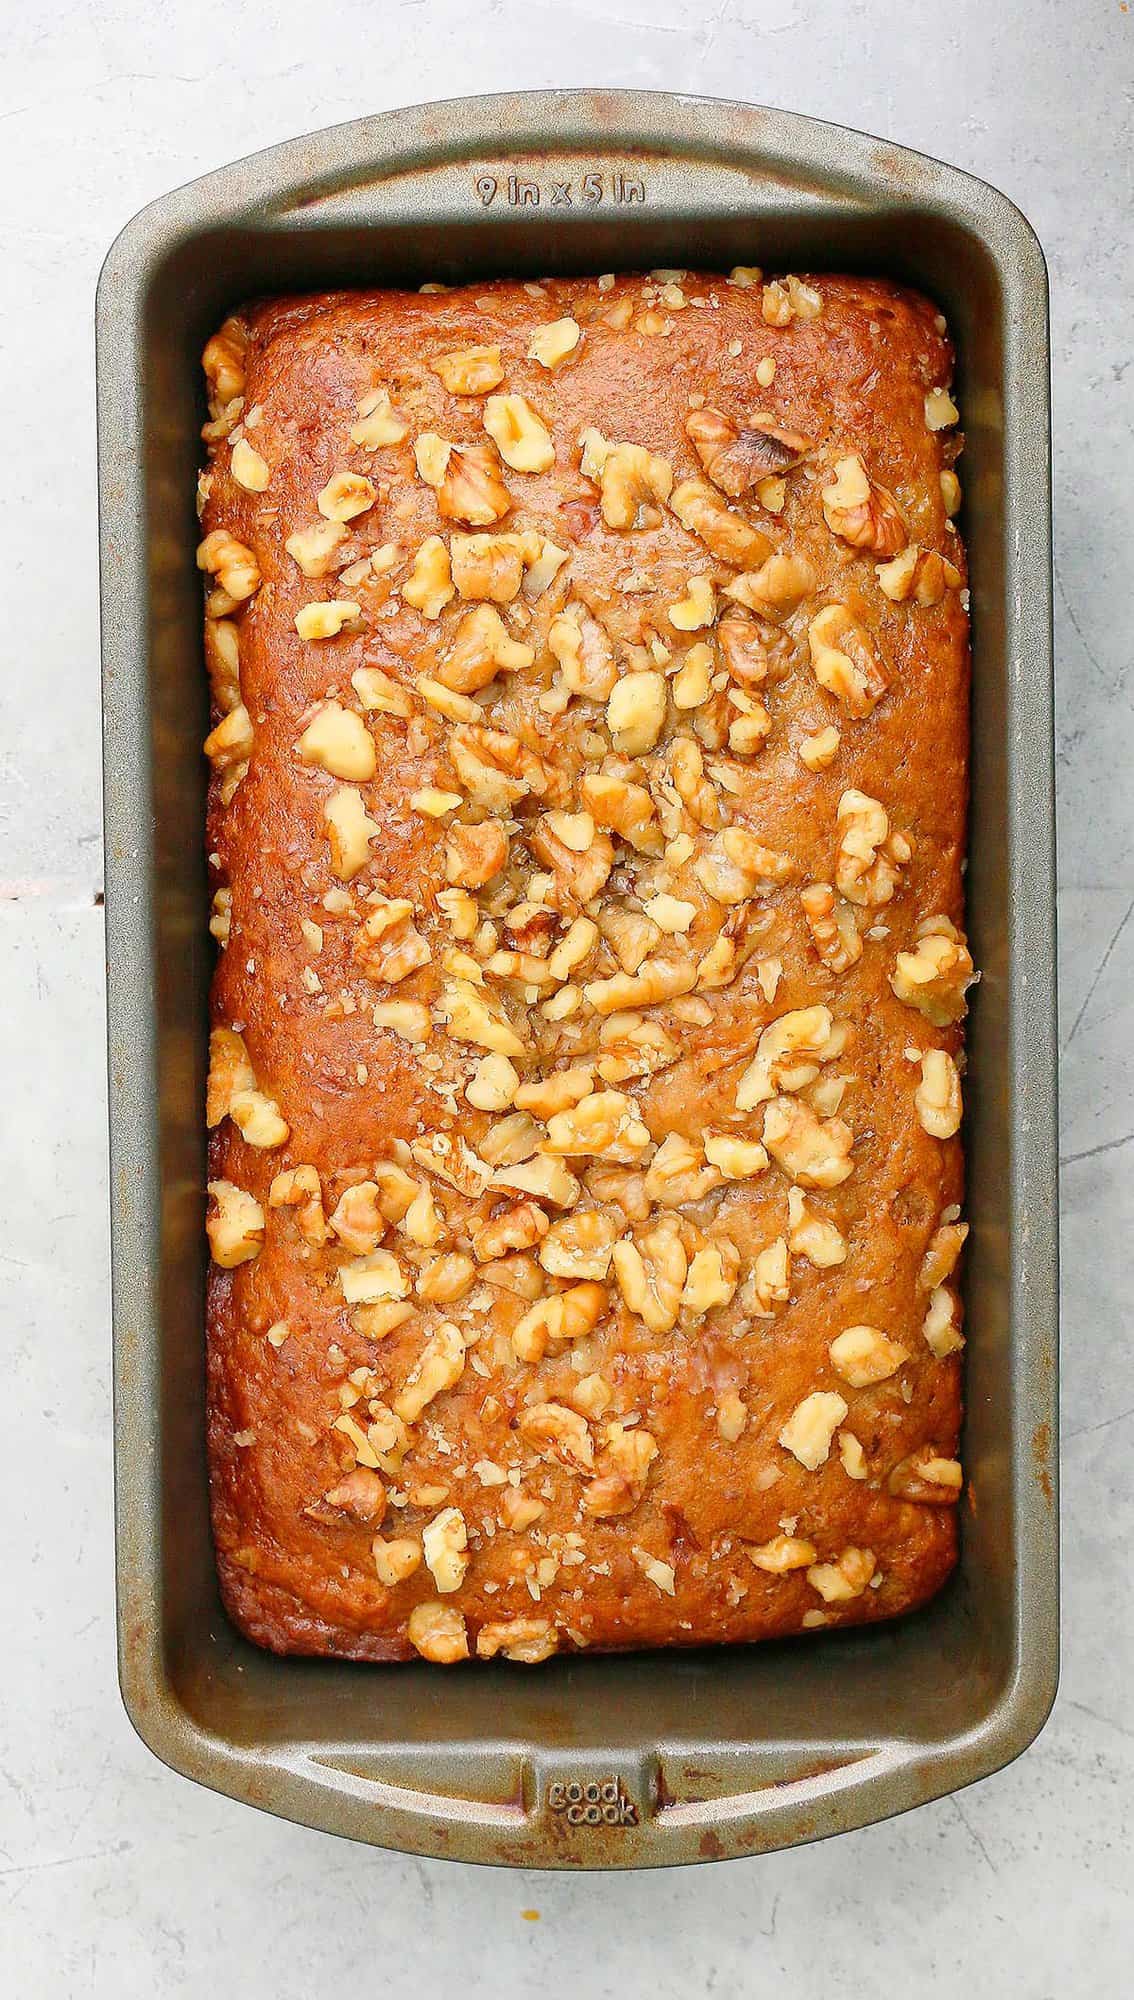 metal loaf pan with baked banana bread.